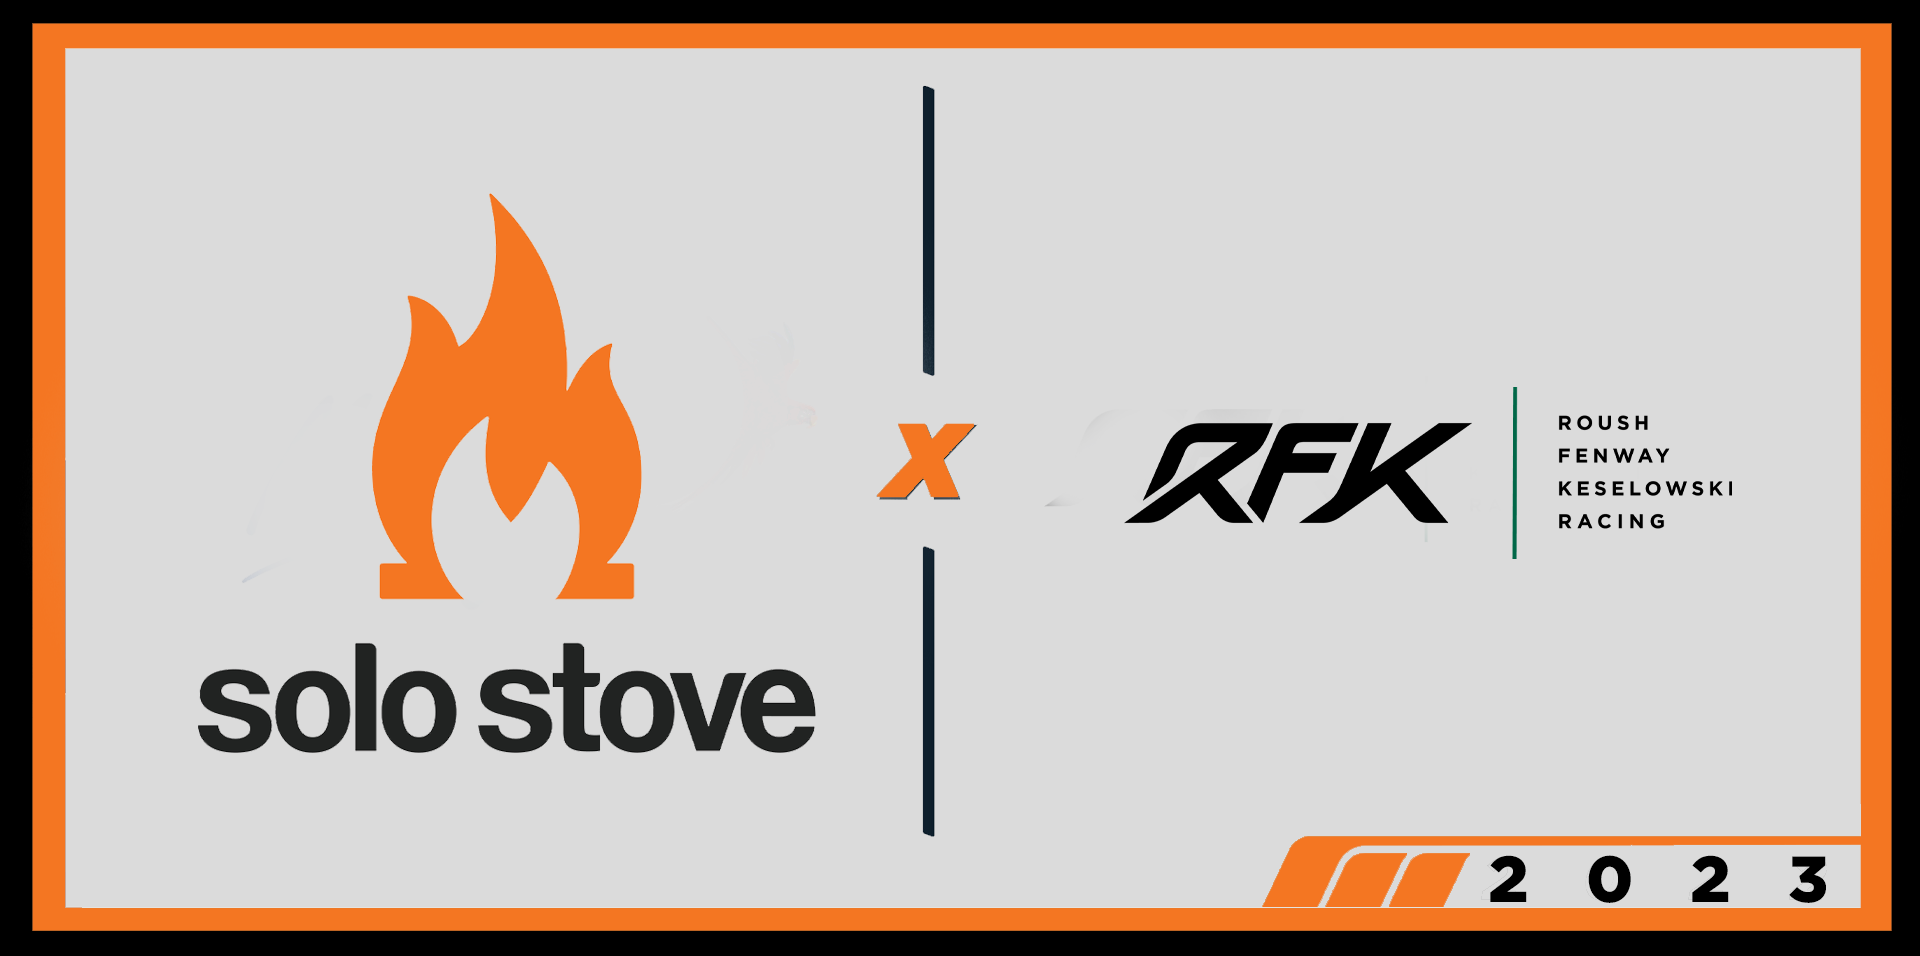 RFK Announces Partnership with Solo Stove